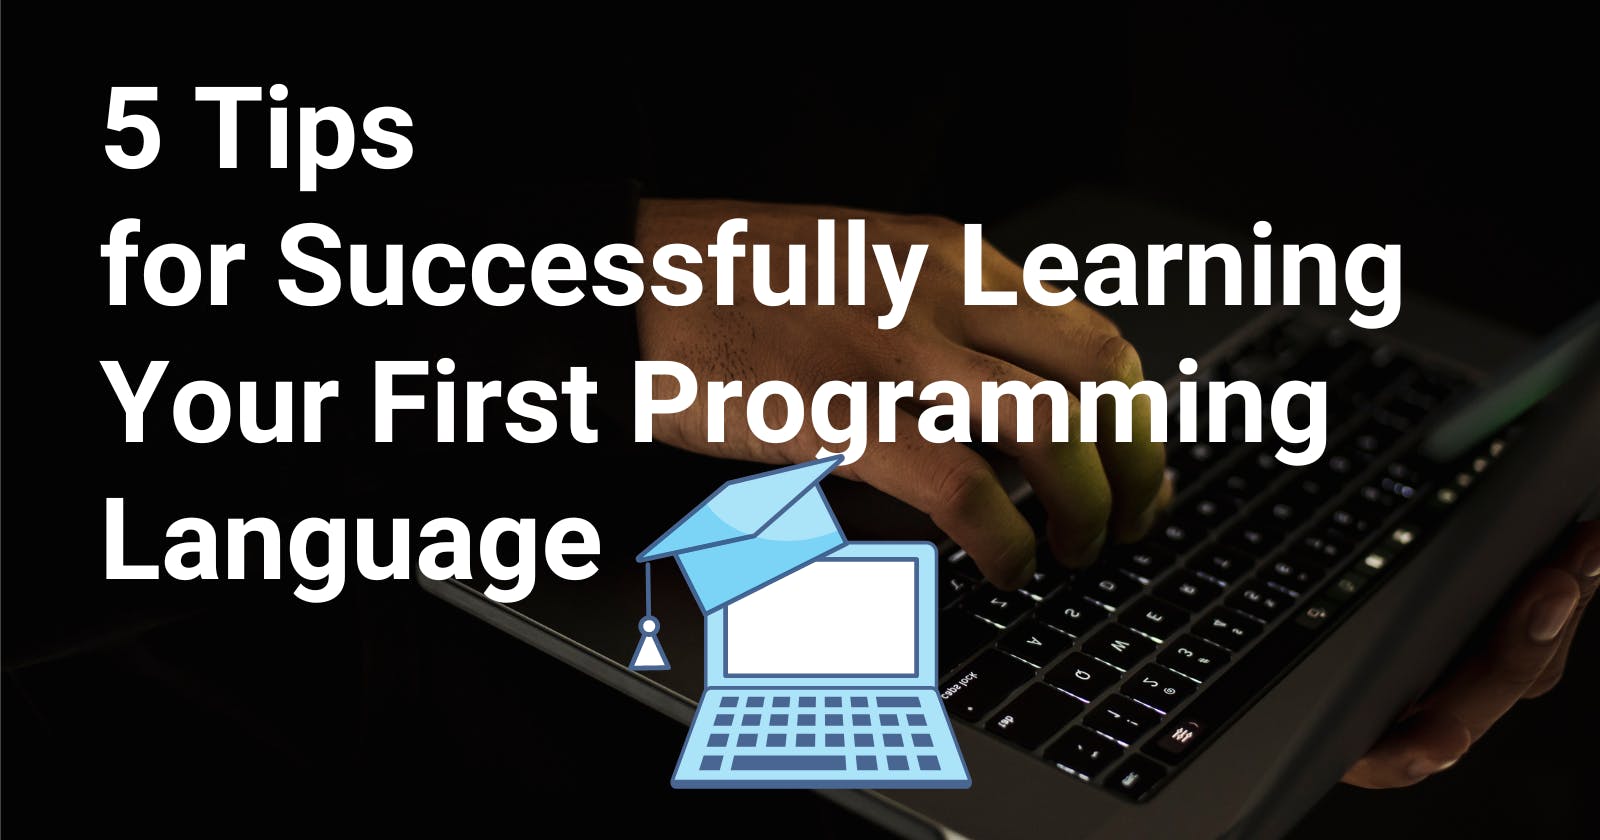 5 Tips for Successfully Learning Your First Programming Language